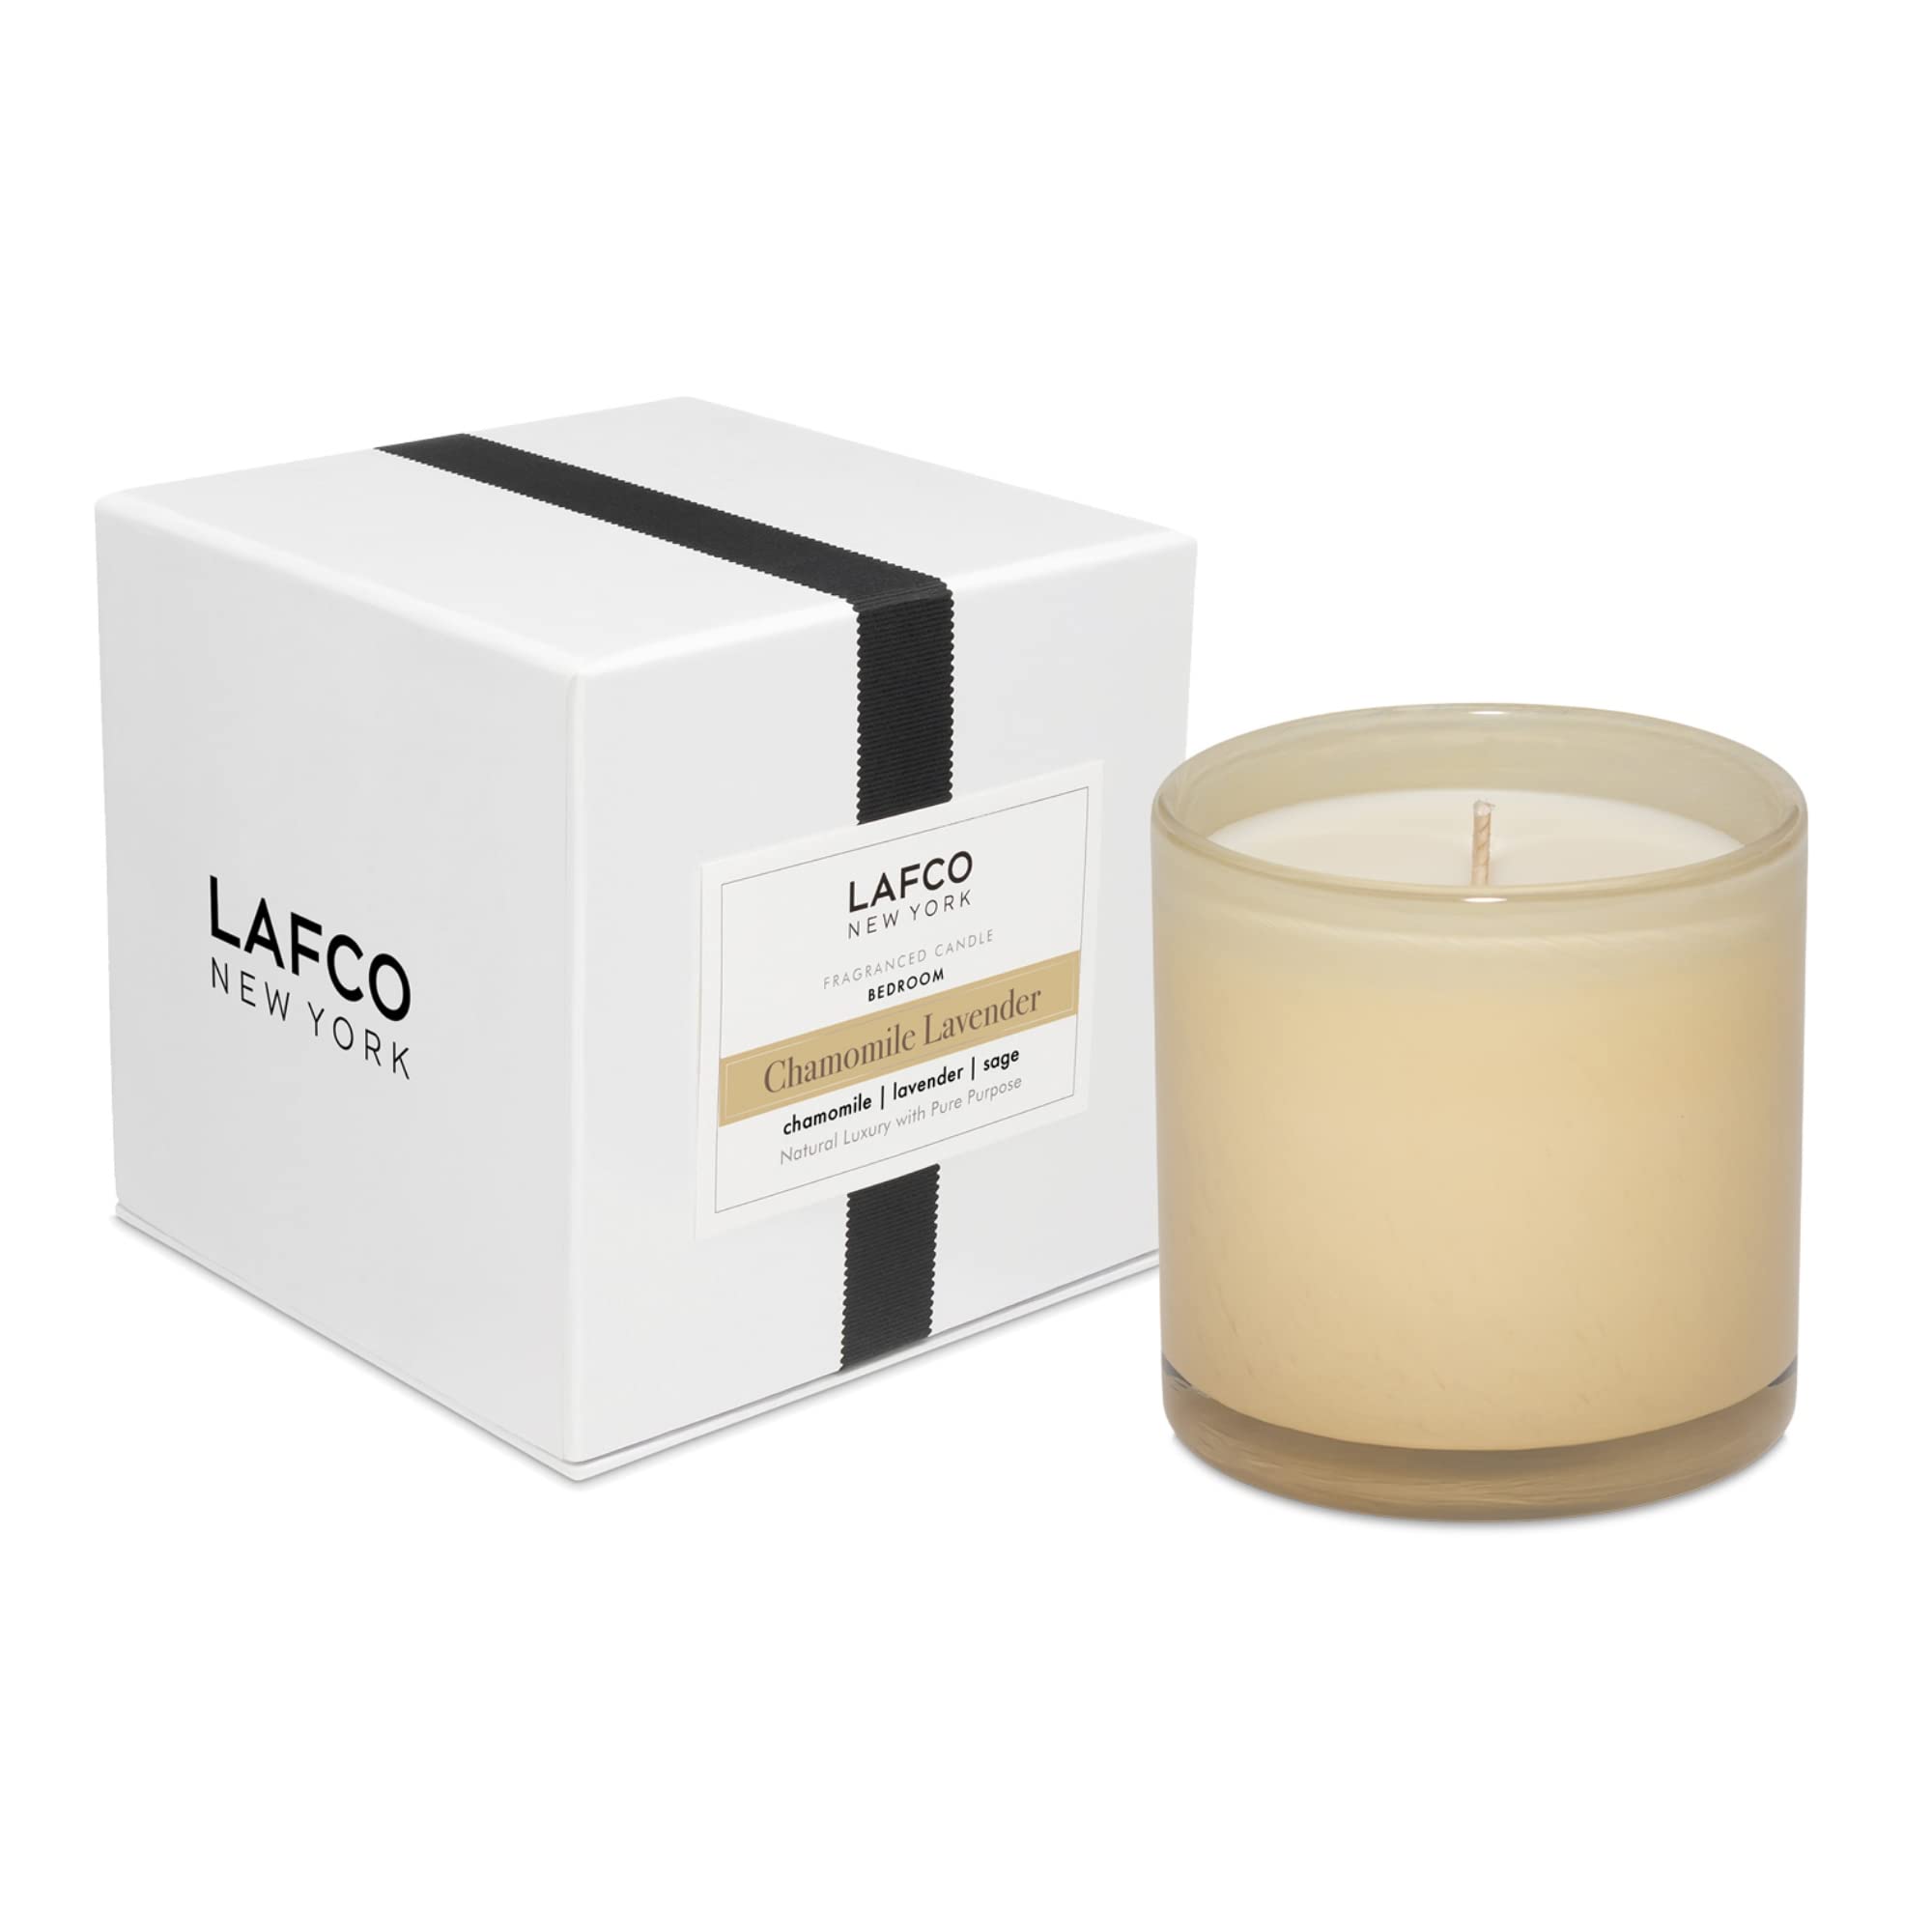 LAFCO New York Classic Candle, Chamomile Lavender - 6.5 oz - 50-Hour Burn Time - Reusable, Hand Blown Glass Vessel - Made in The USA